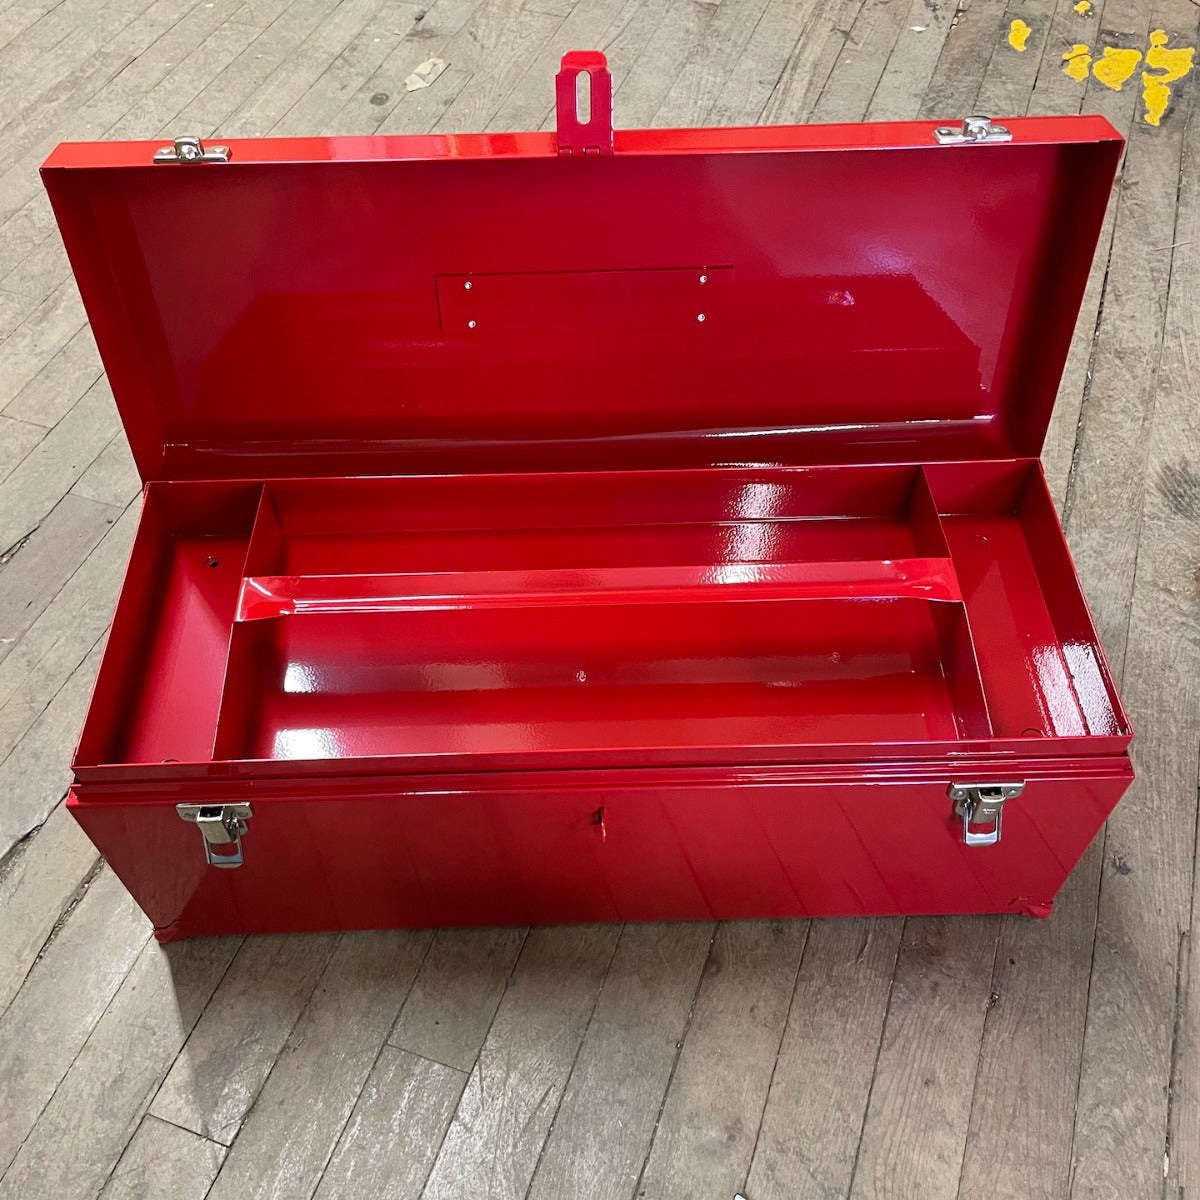 Valley Red Metal Tool Box w/ Handle and Tray 22 1/2 x 8 1/2 x 9